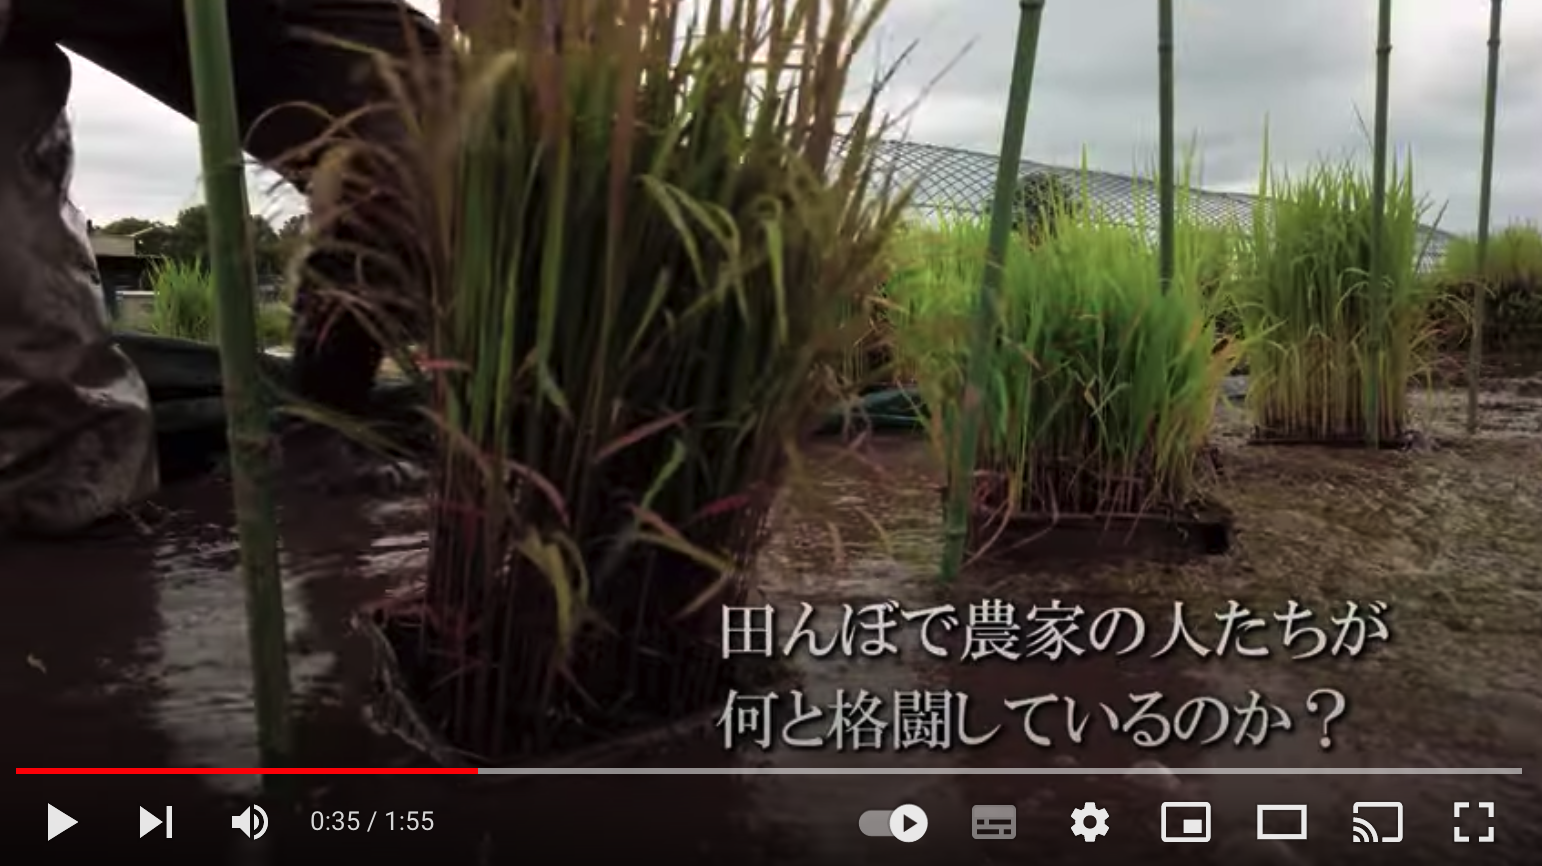 DOCUMENTARIES OF JAPANESE AGRICULTURE